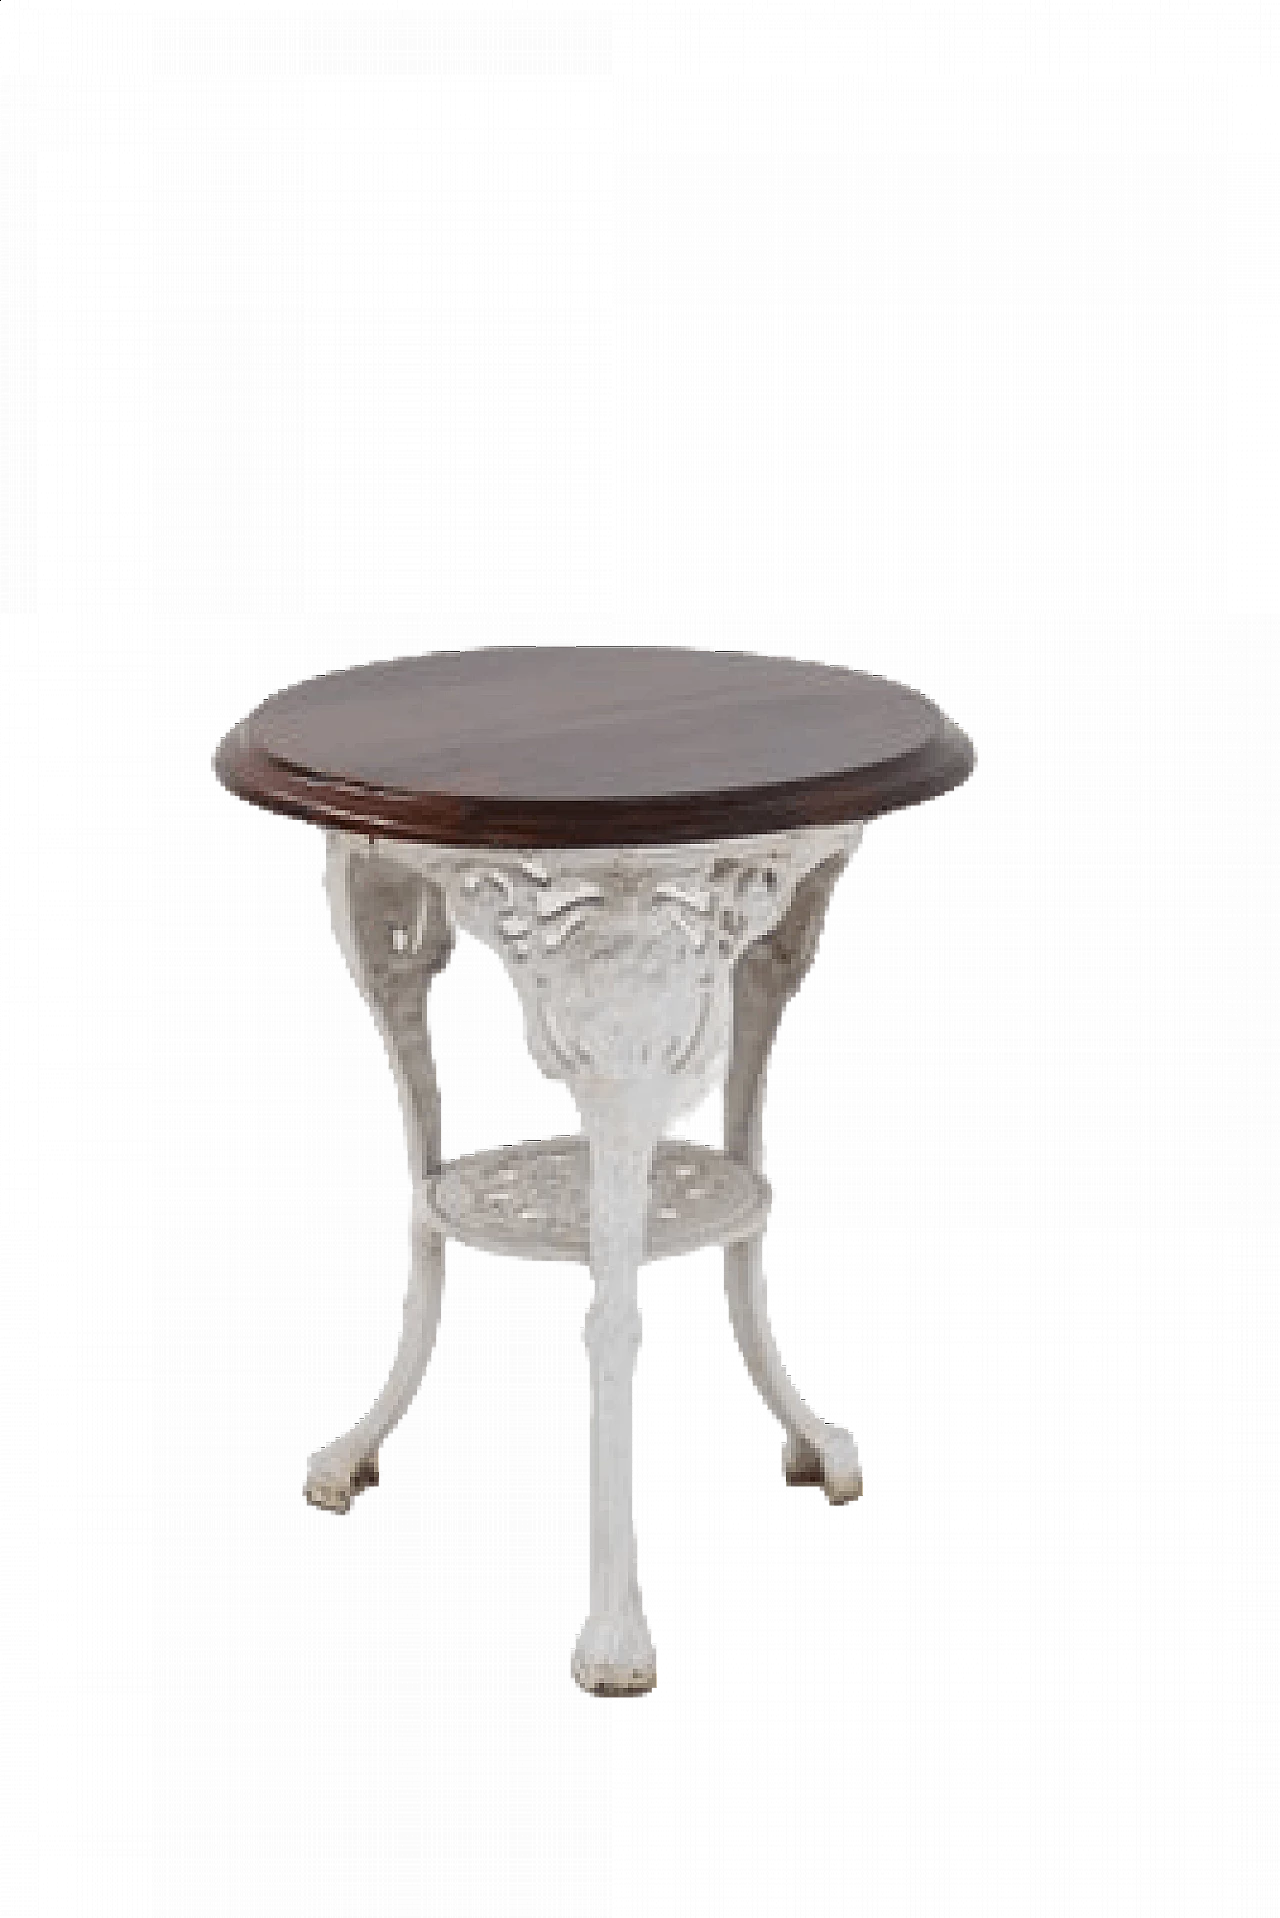 Cast iron table with wooden top, 19th century 11